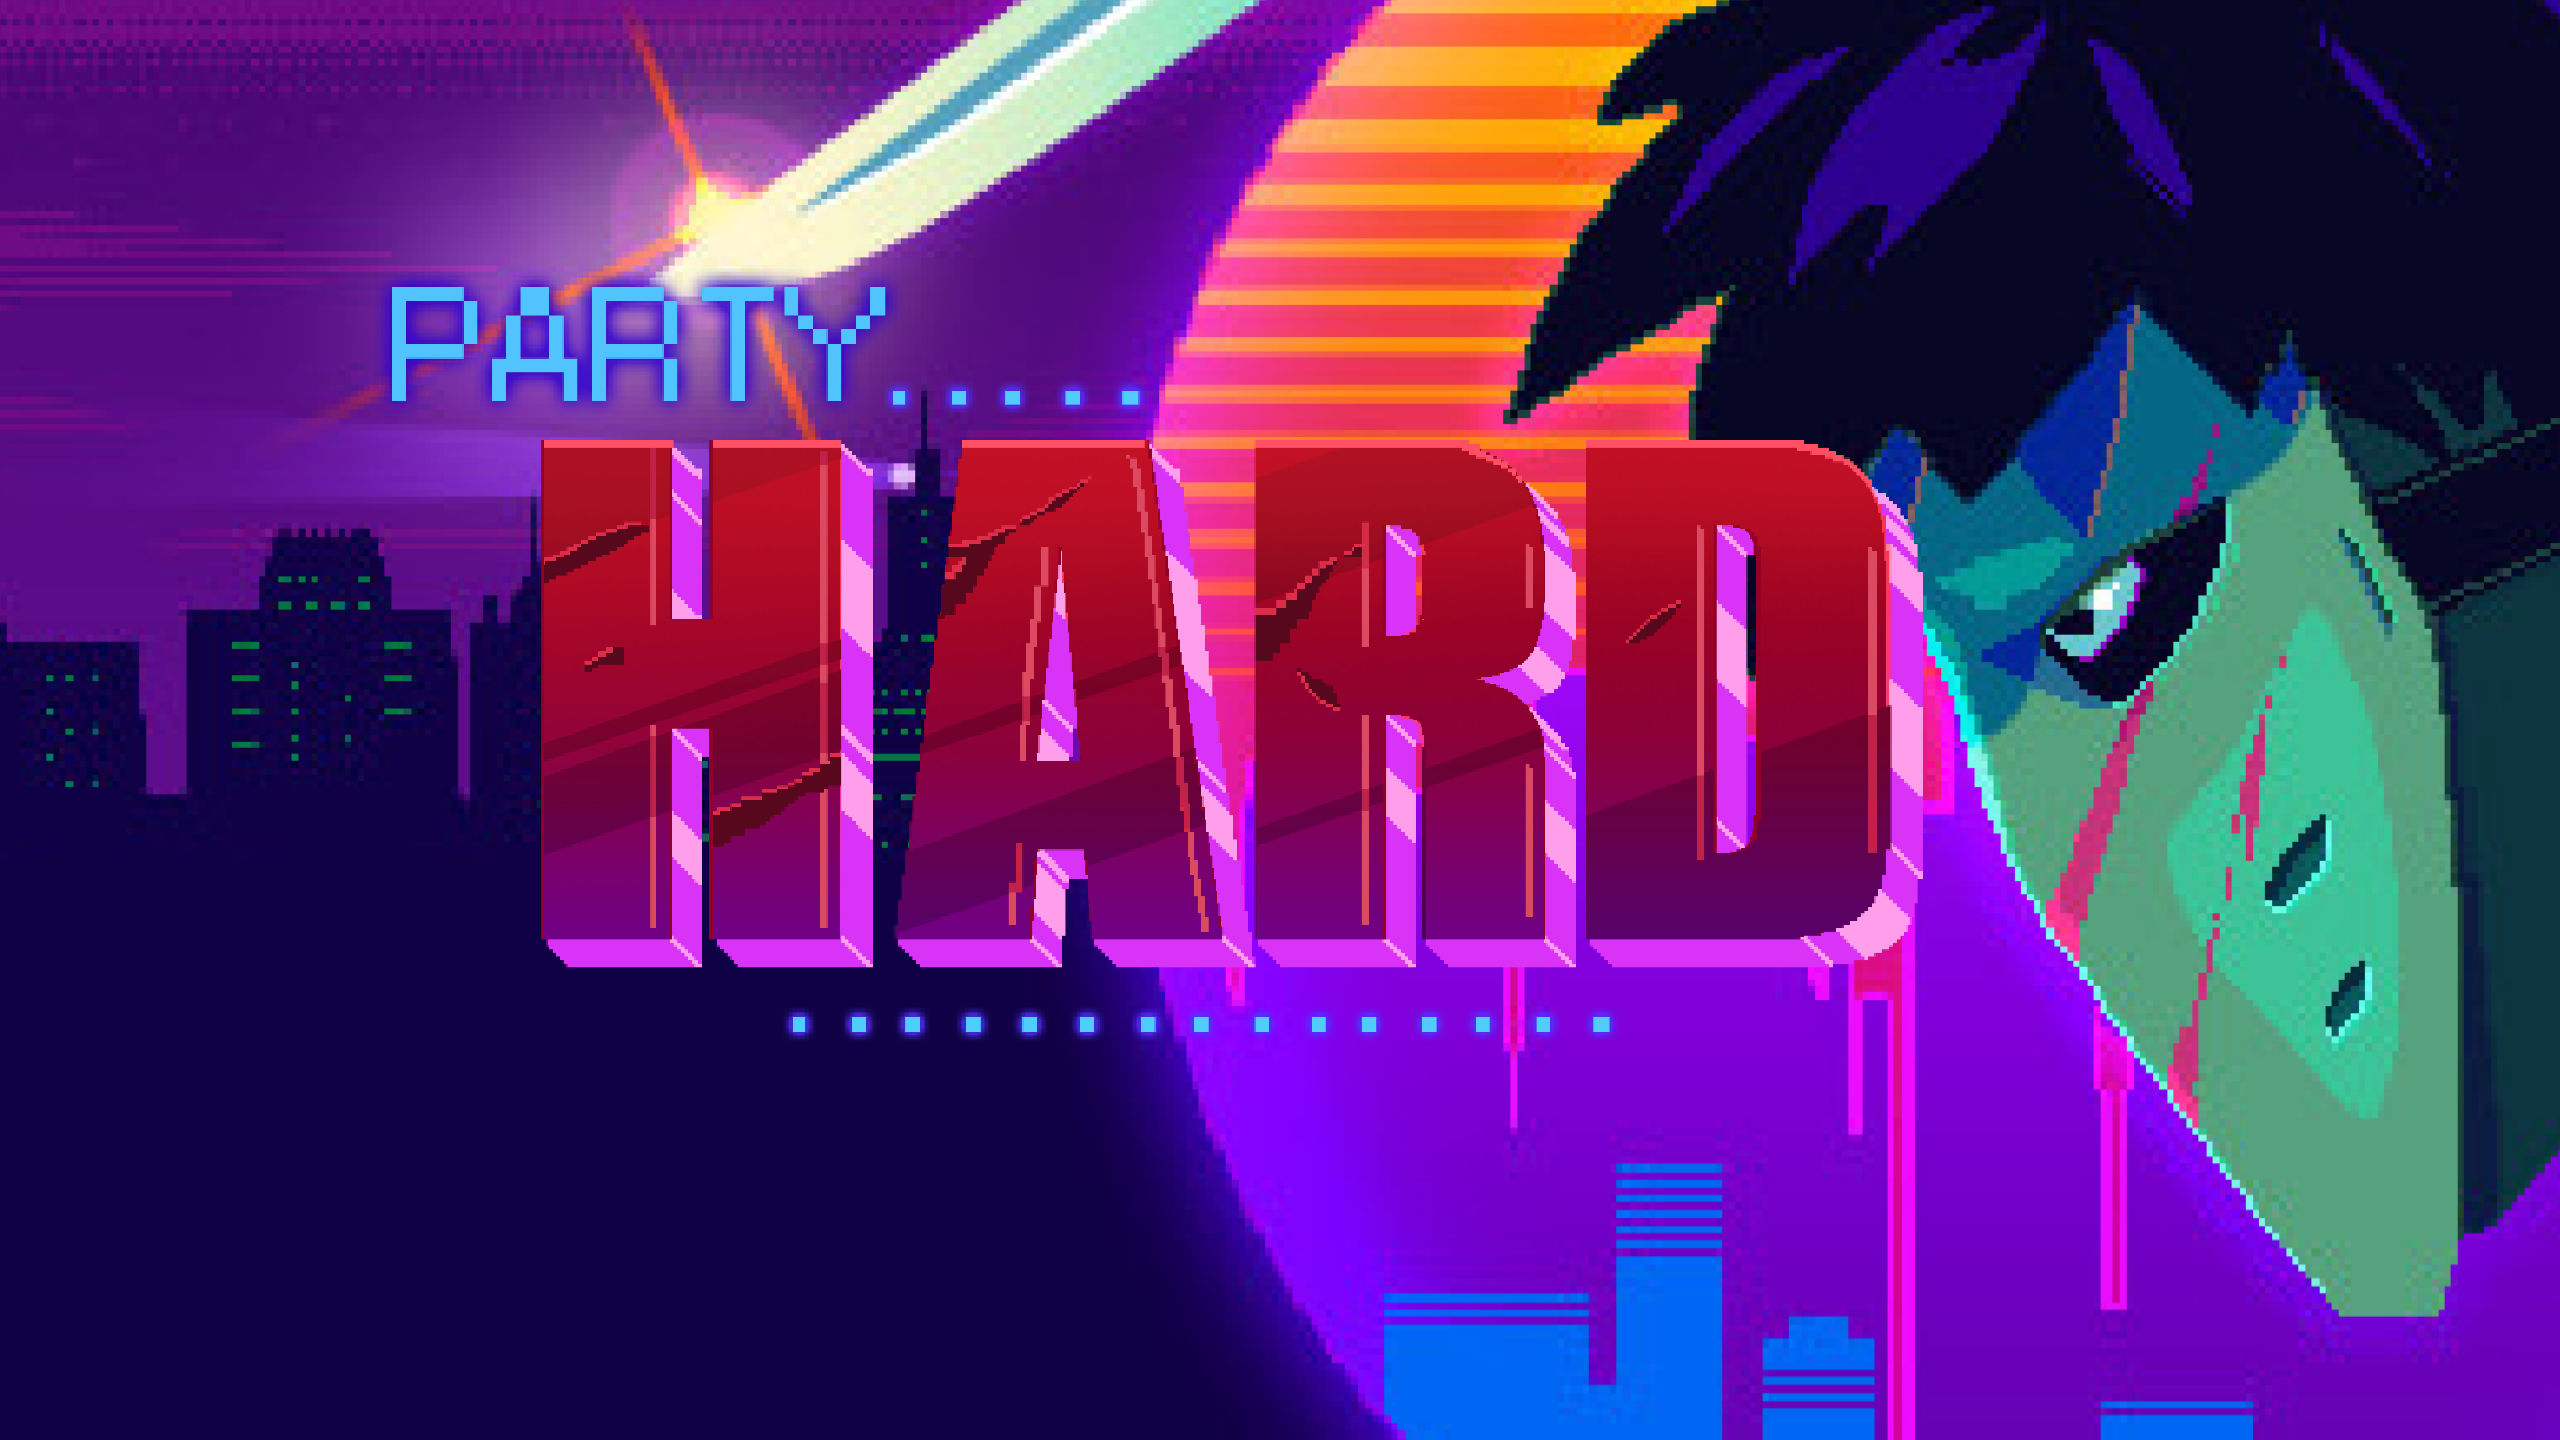 Party hard me. Пати Хард. Party hard (игра). Party hard обои. Обои пати Хард 2.